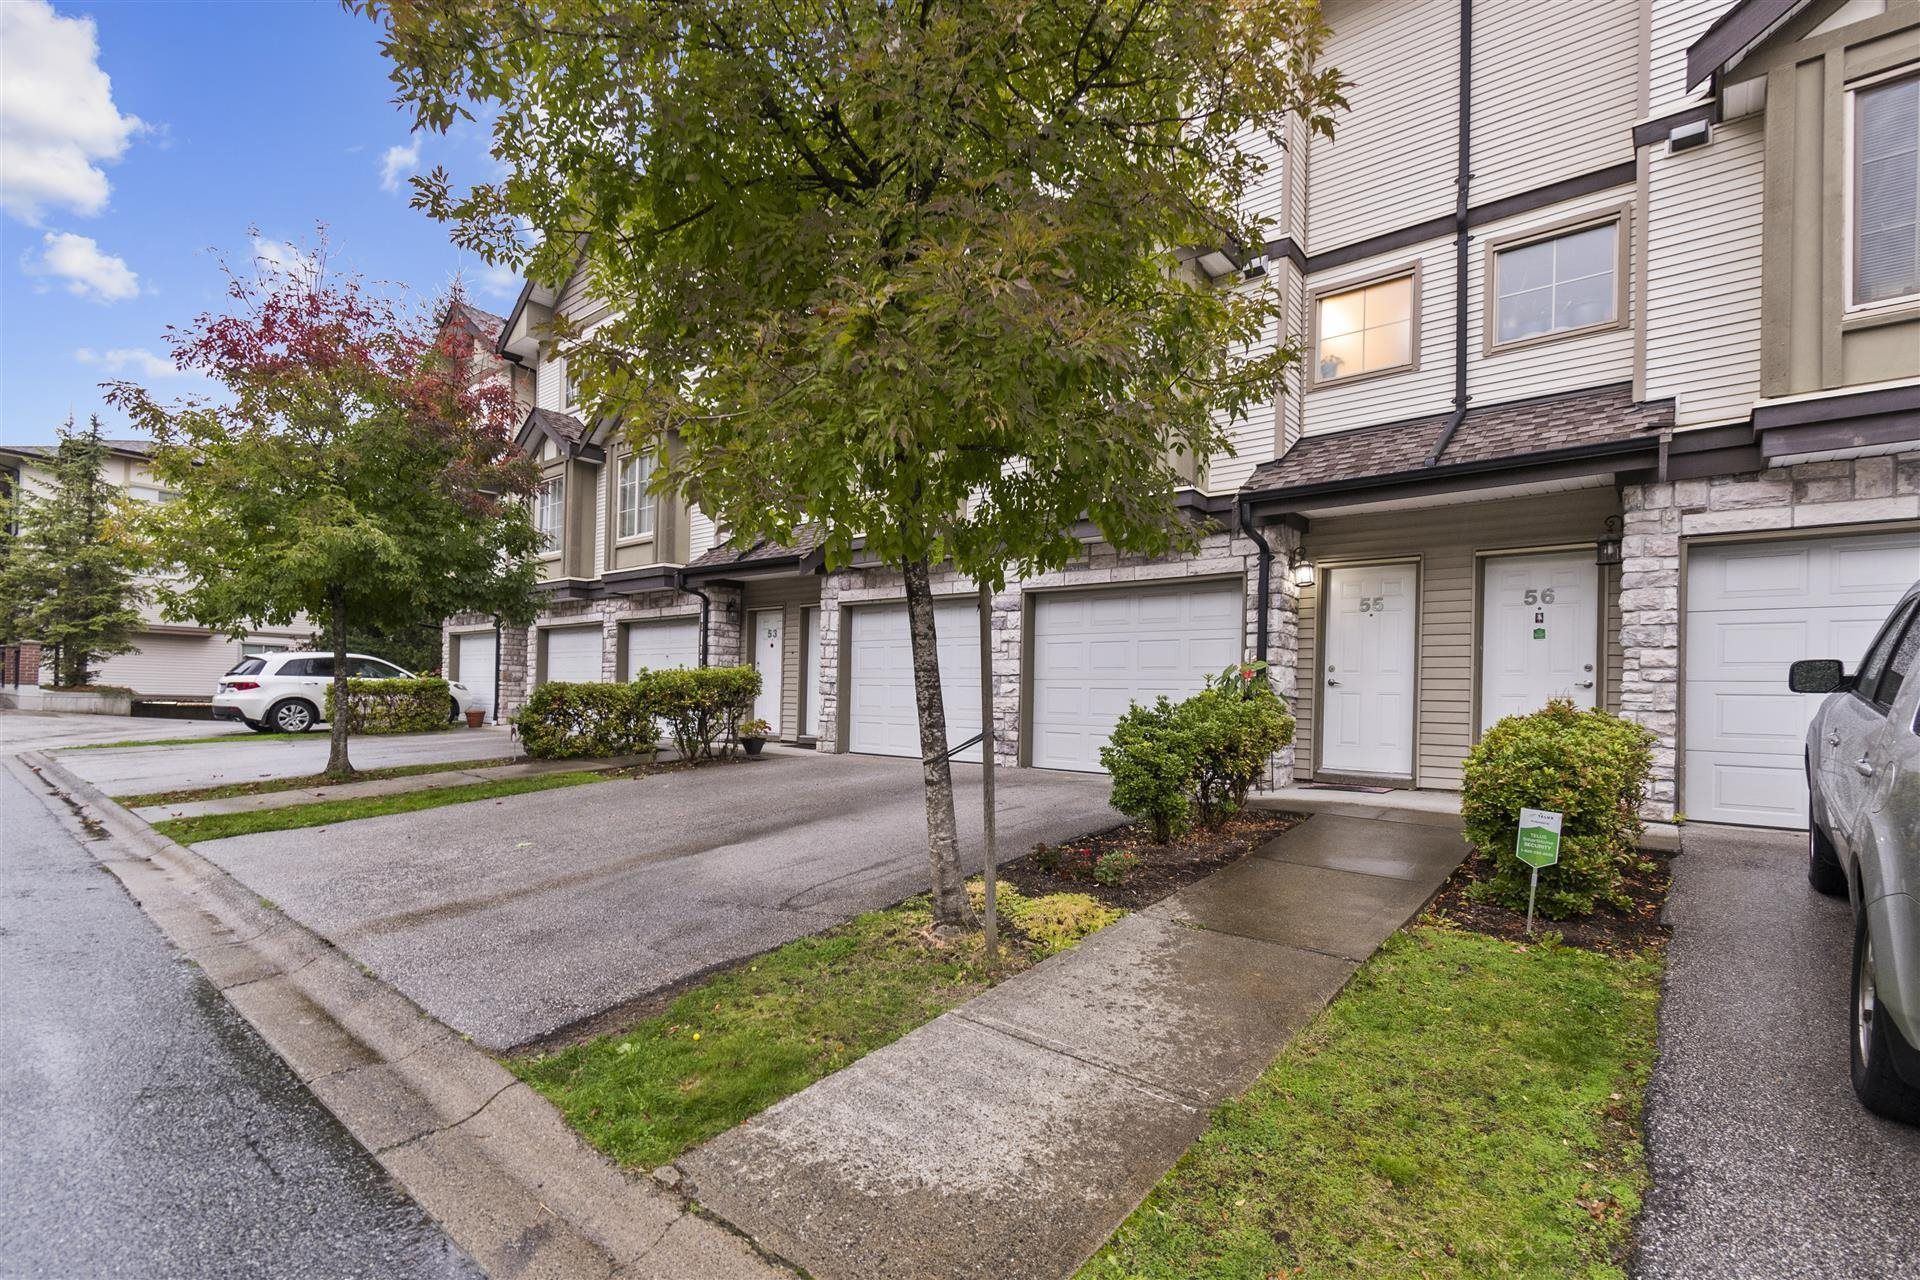 Main Photo: 55 14855 100 Avenue in Surrey: Guildford Townhouse for sale (North Surrey)  : MLS®# R2625091